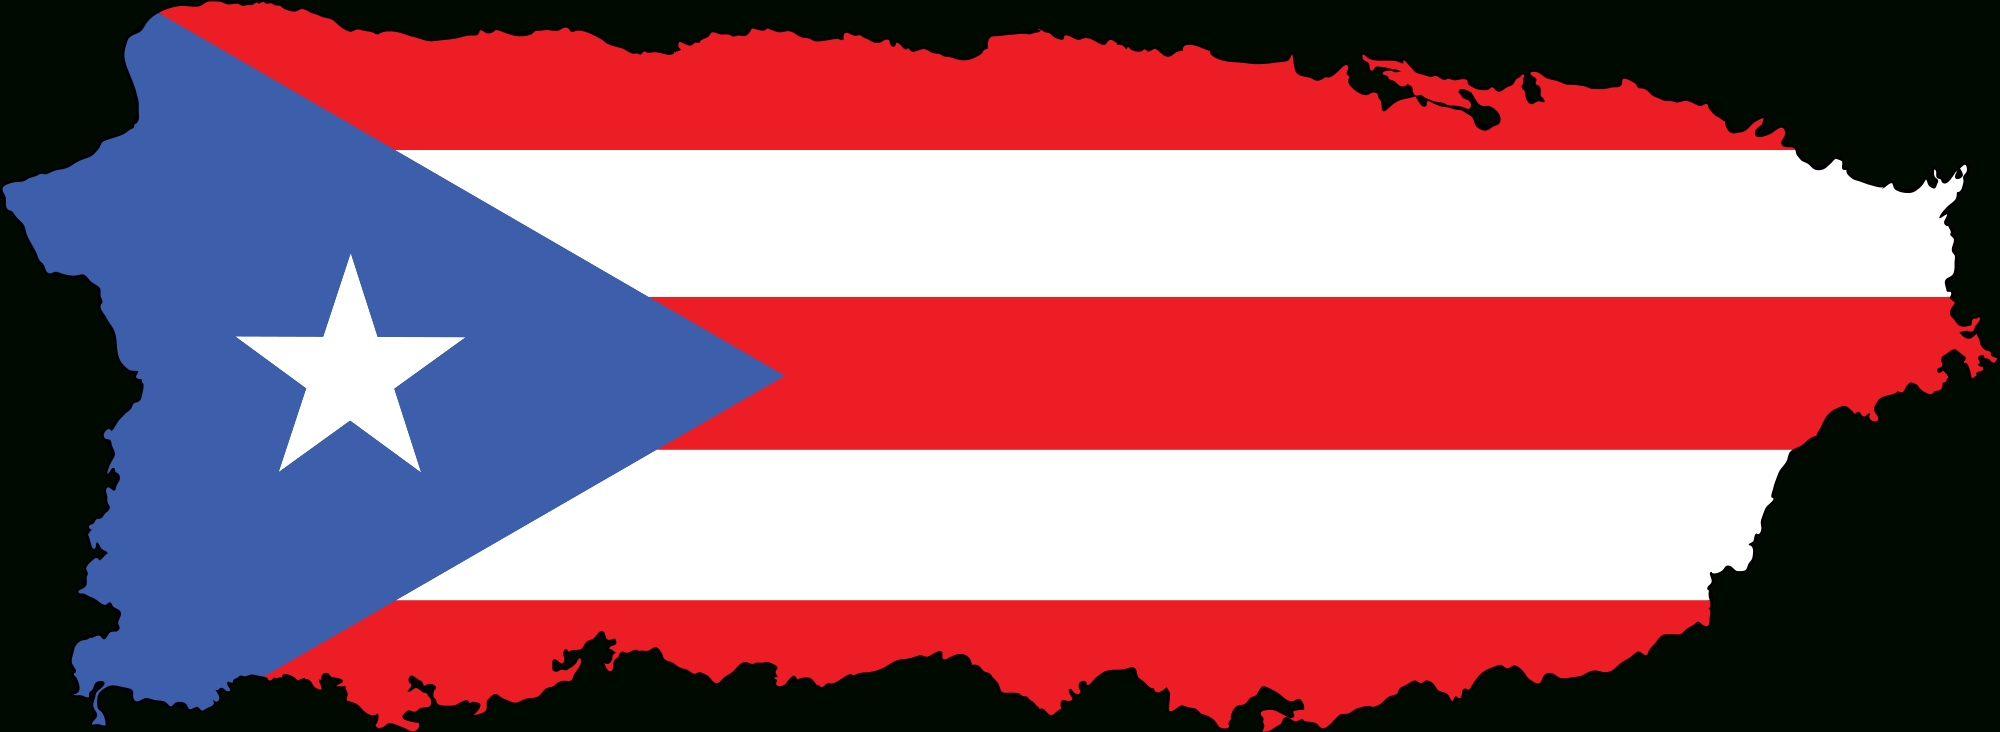 10 Most Popular And Newest Puerto Rico Flags Images for Desktop Computer wi...